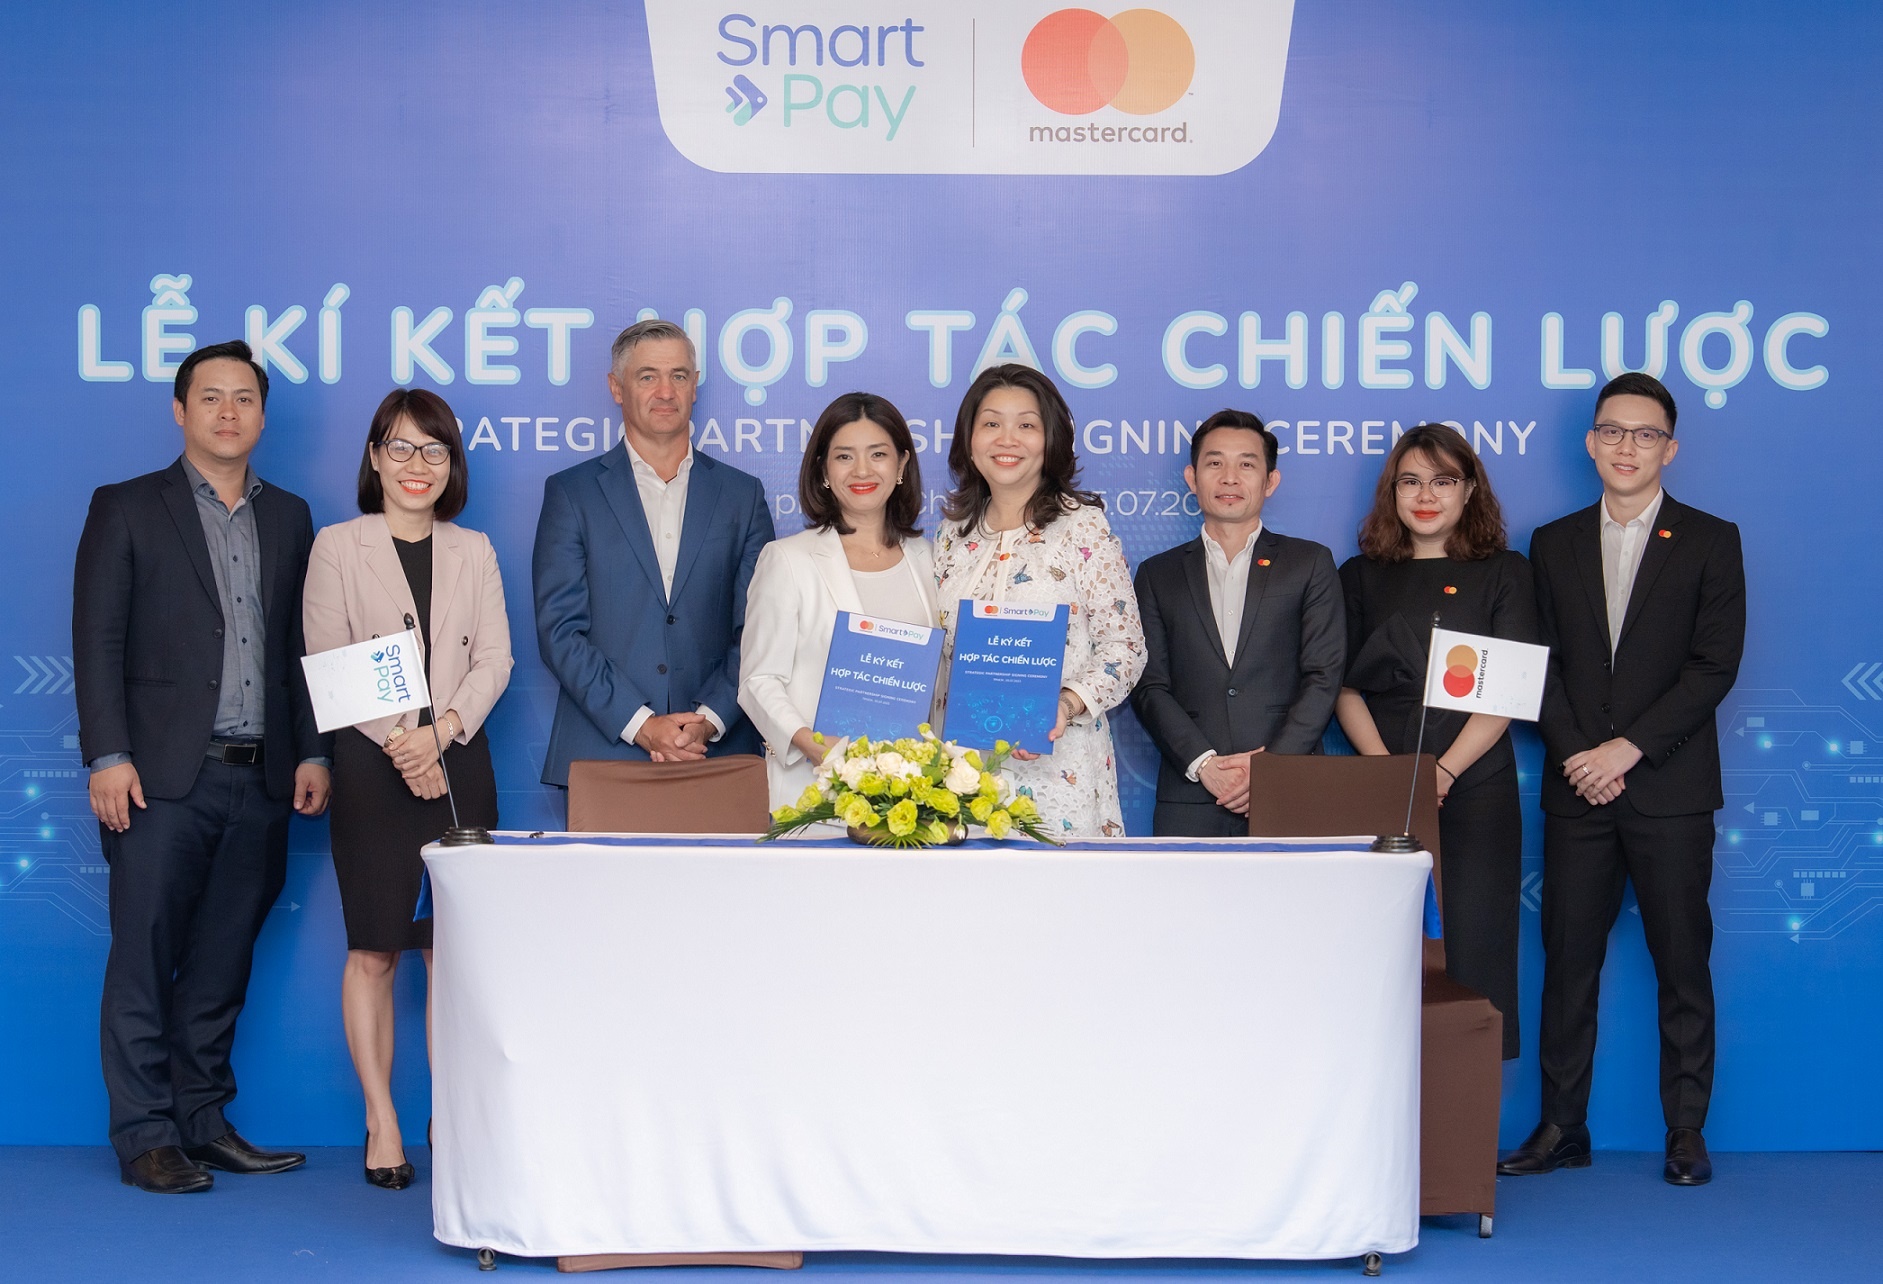 Mastercard expands collaboration with SmartPay to accelerate cashless payment adoption